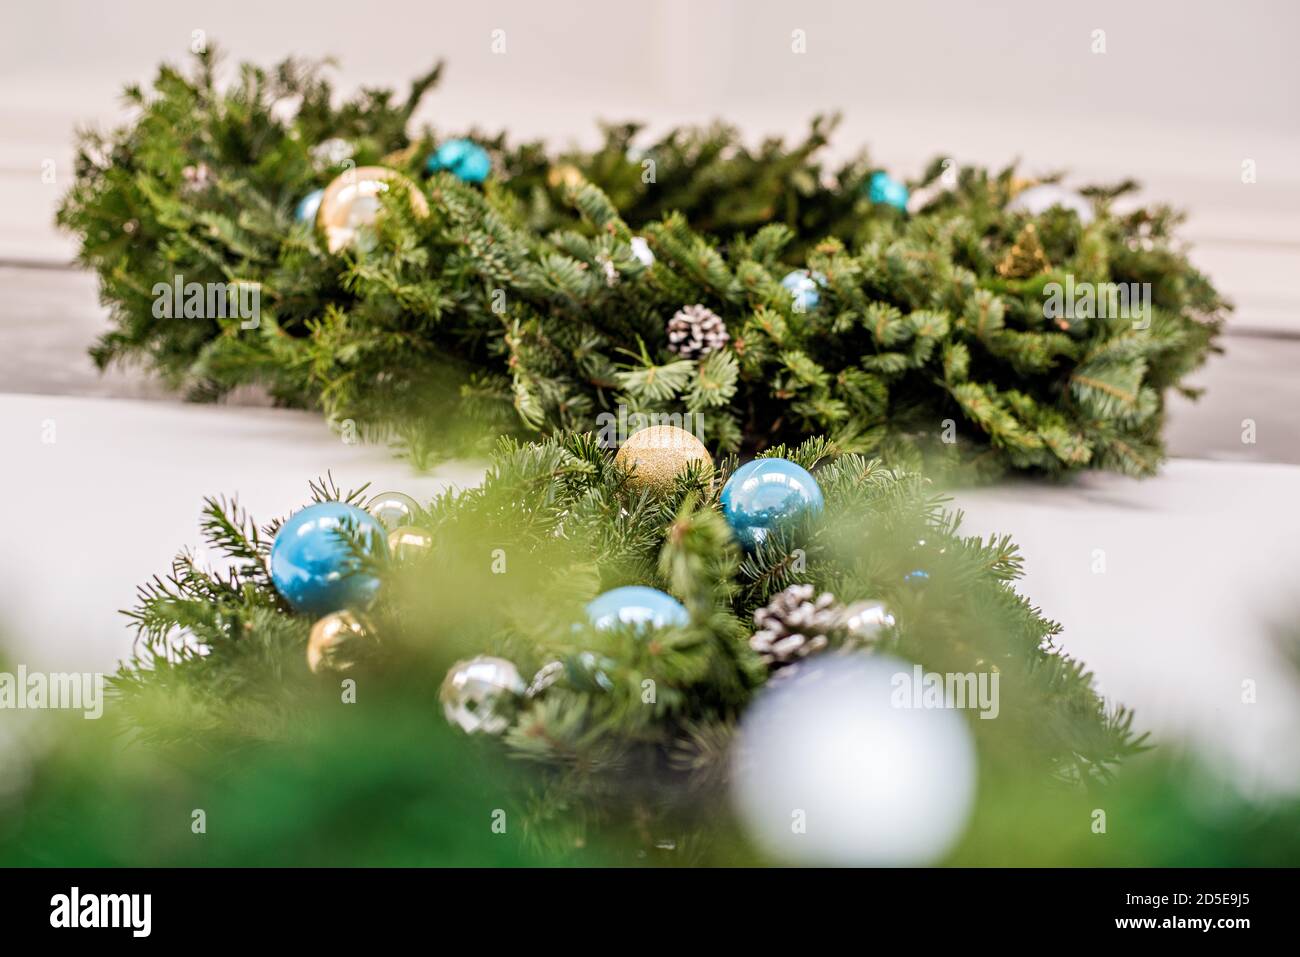 Two Green festive wreaths made of fresh live spruce, decorated with New Year's toys, garlands. Christmas home decoration. Hanging over a fireplace Stock Photo